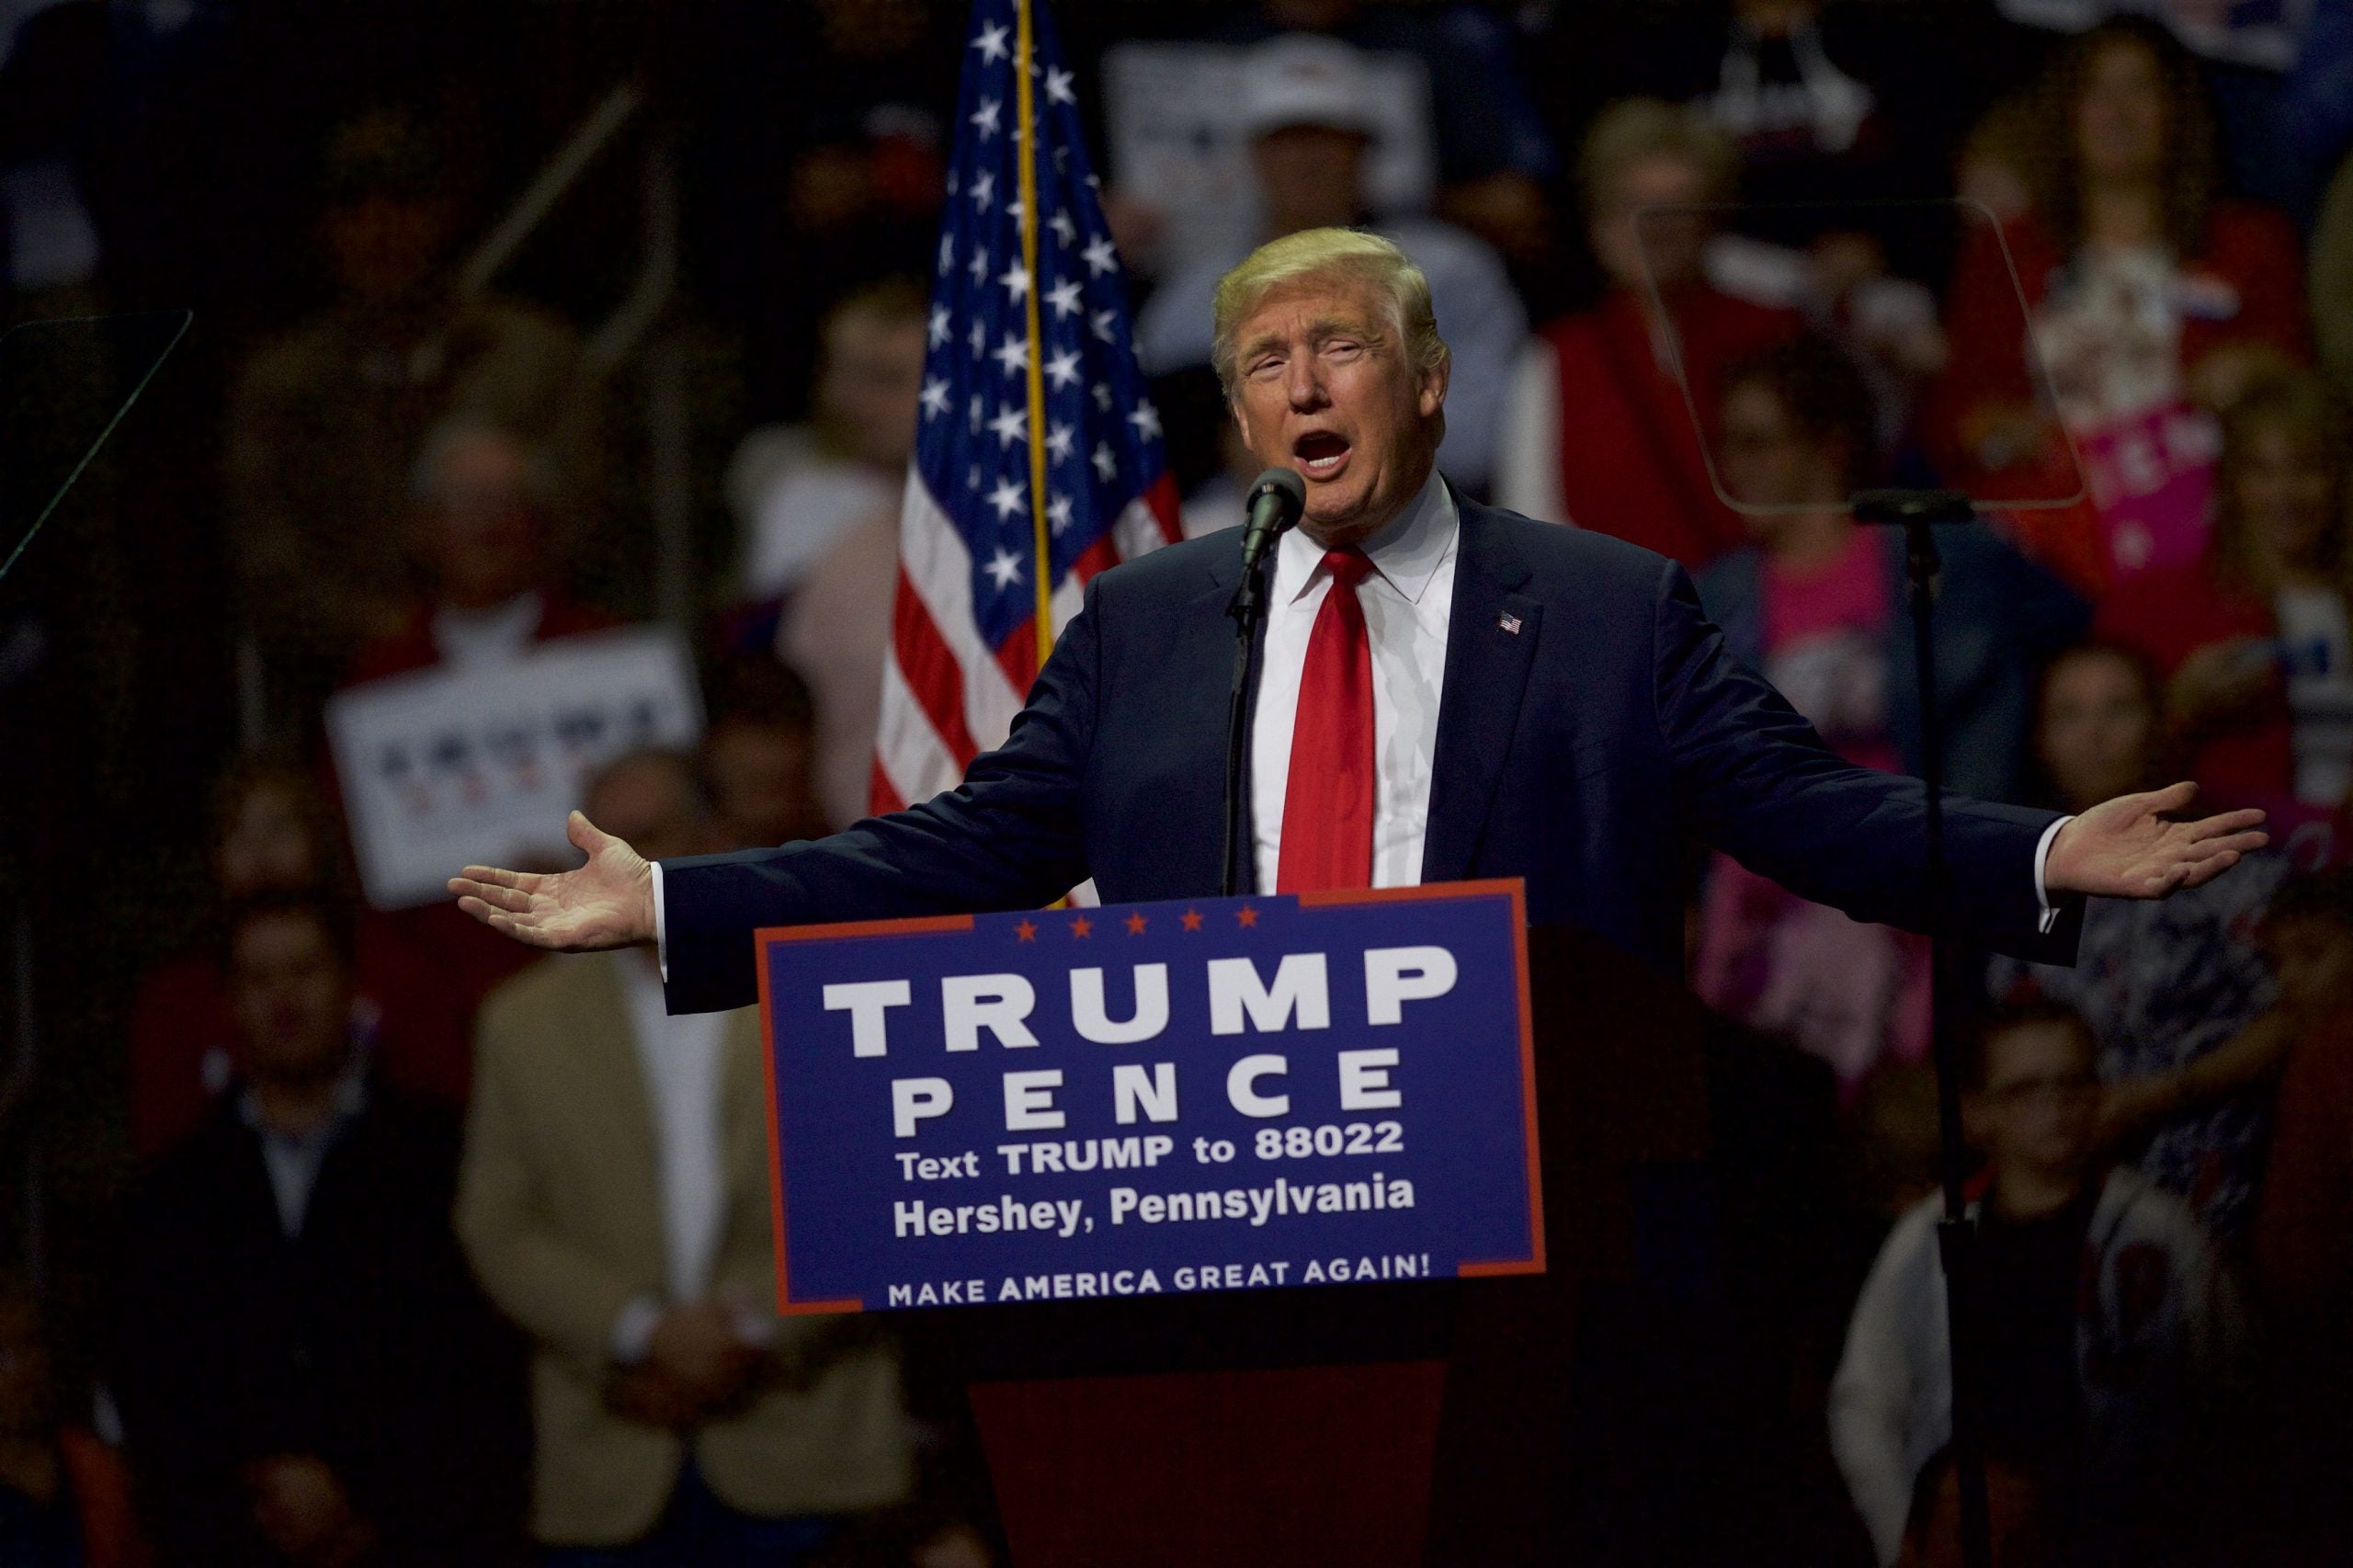 New Report Suggests 2016 Trump Campaign Intentionally Deterred Black Voters